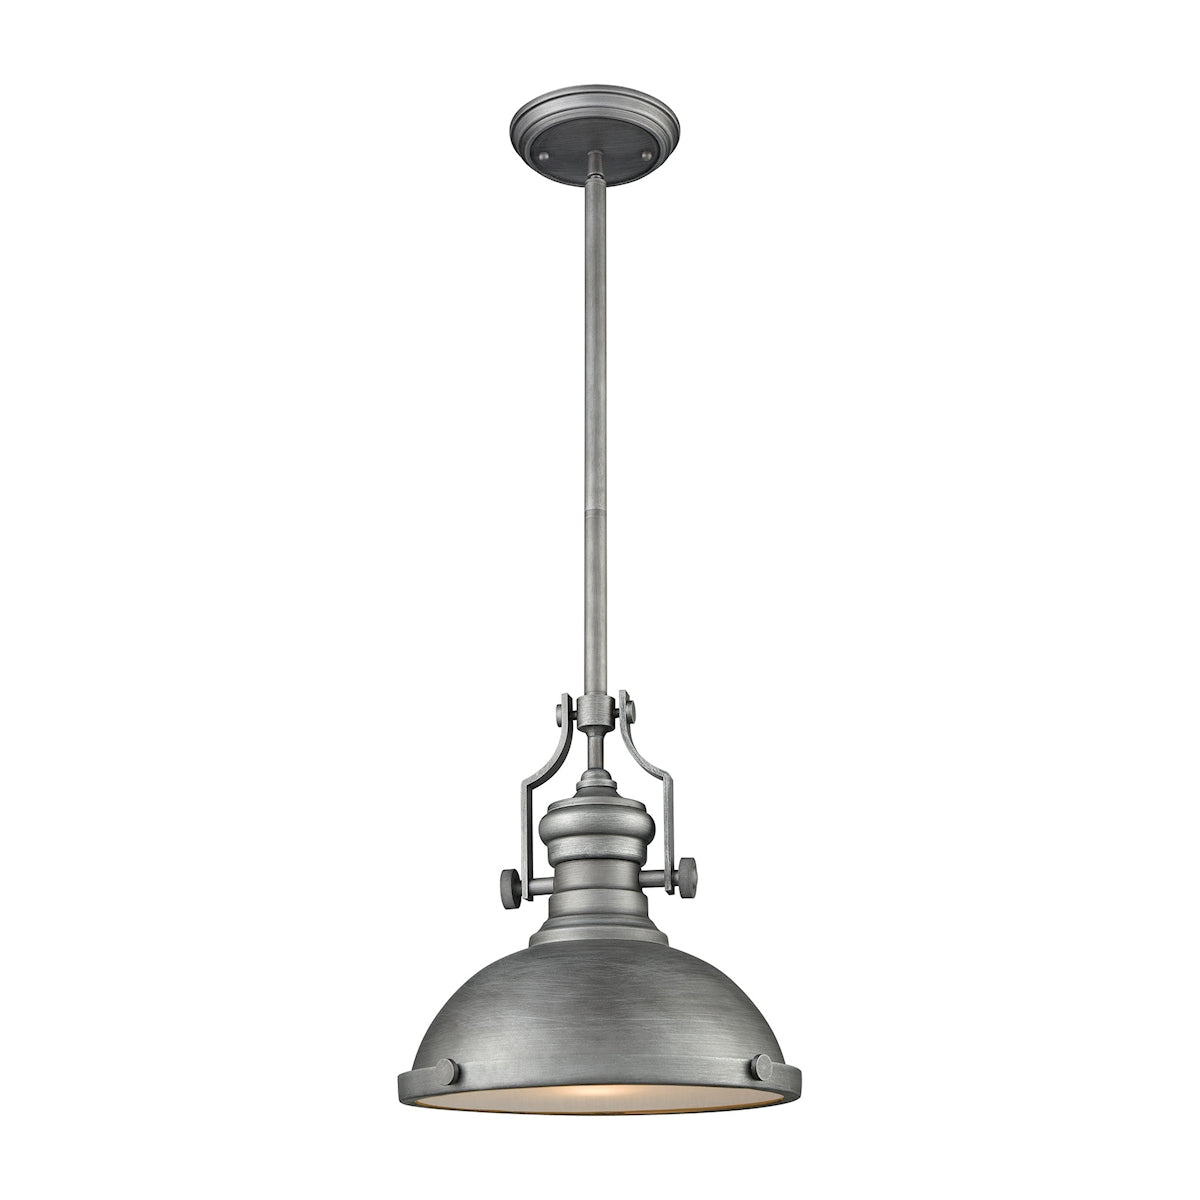 ELK Lighting 66584-1 Chadwick 1-Light Pendant in Weathered Zinc with Metal and Frosted Glass Diffuser